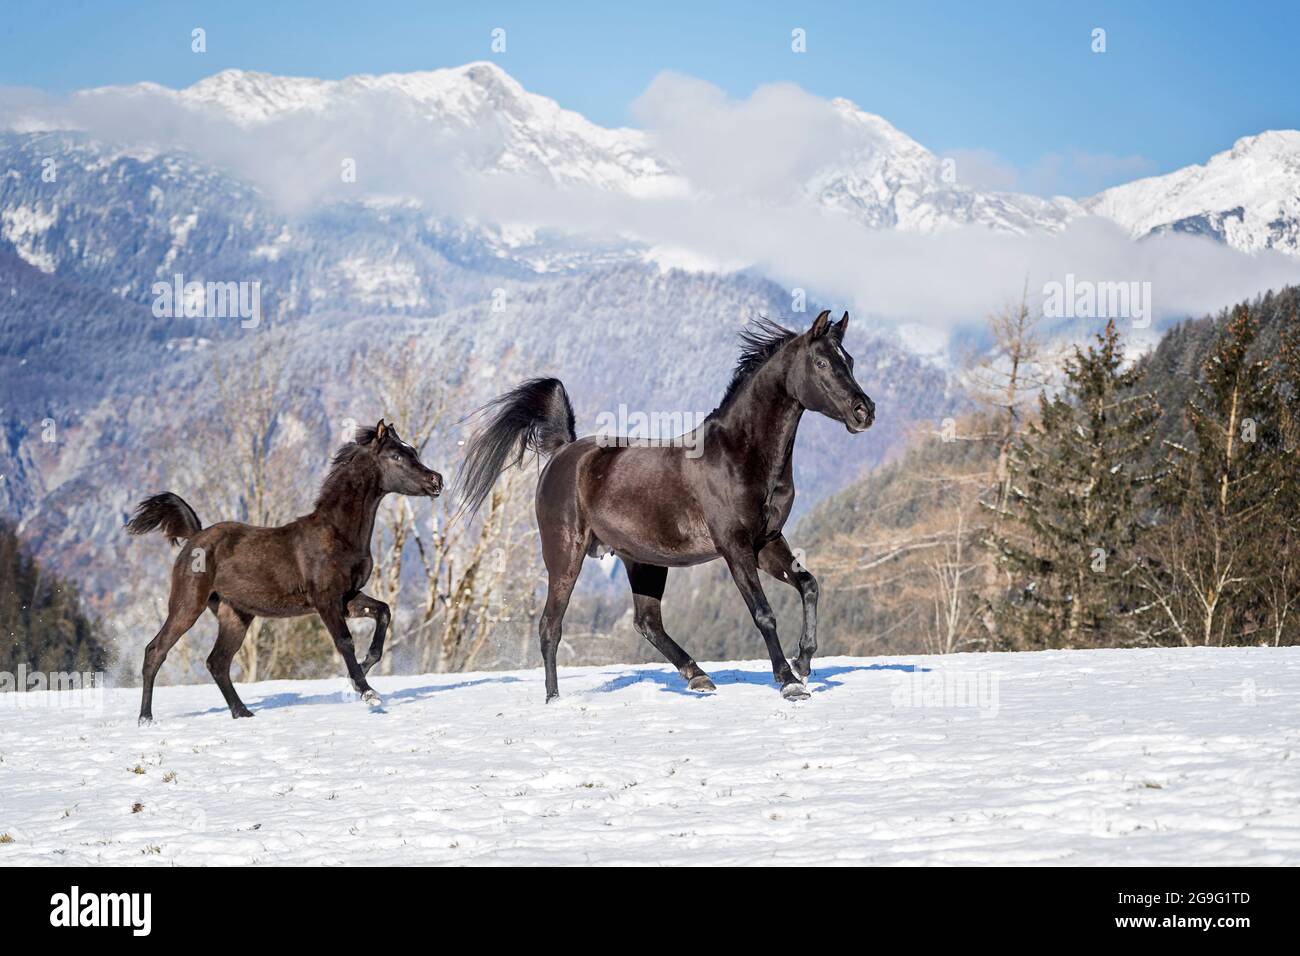 Arab Horse. Black mare and her foal galloping on a snowy pasture. Austria Stock Photo